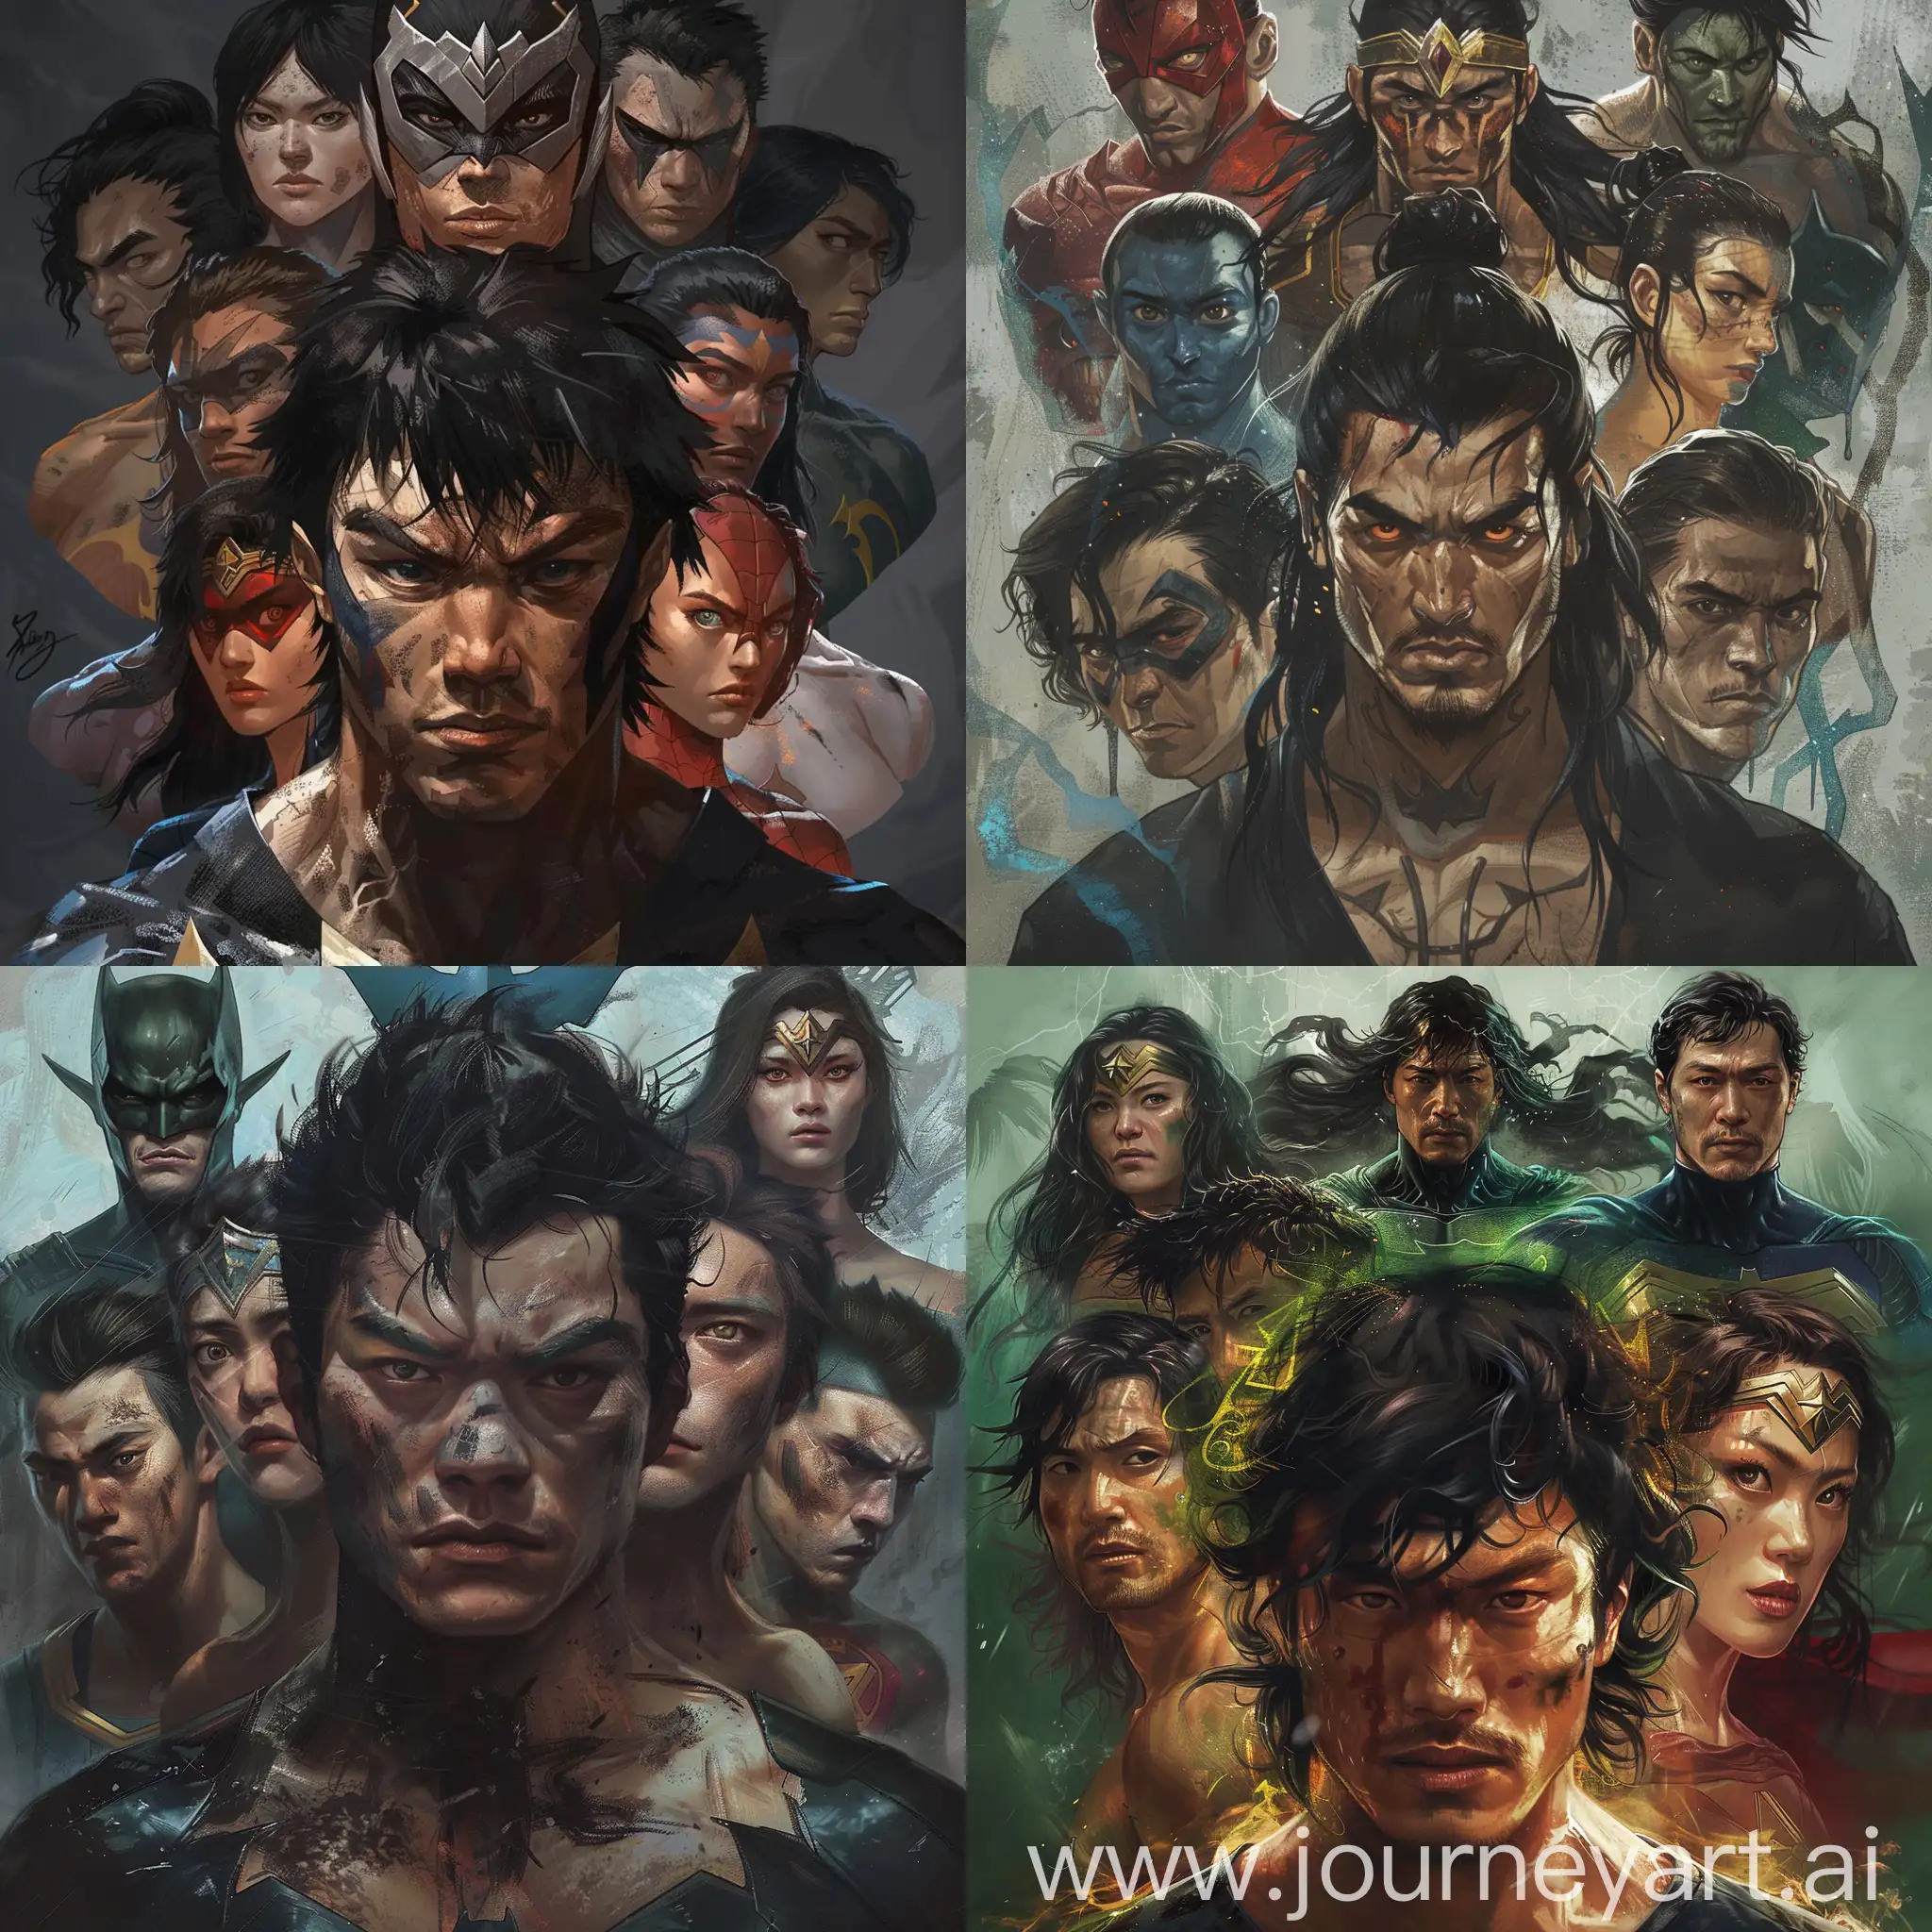 Create an image showing Fang Yuan's defiance as he challenges the major justice factions. Fang Yuan, with his dark complexion and untamed black hair, faces off against a diverse group of opponents. Each opponent should be depicted with unique features and expressions, reflecting the varied nature of the justice factions he opposes.